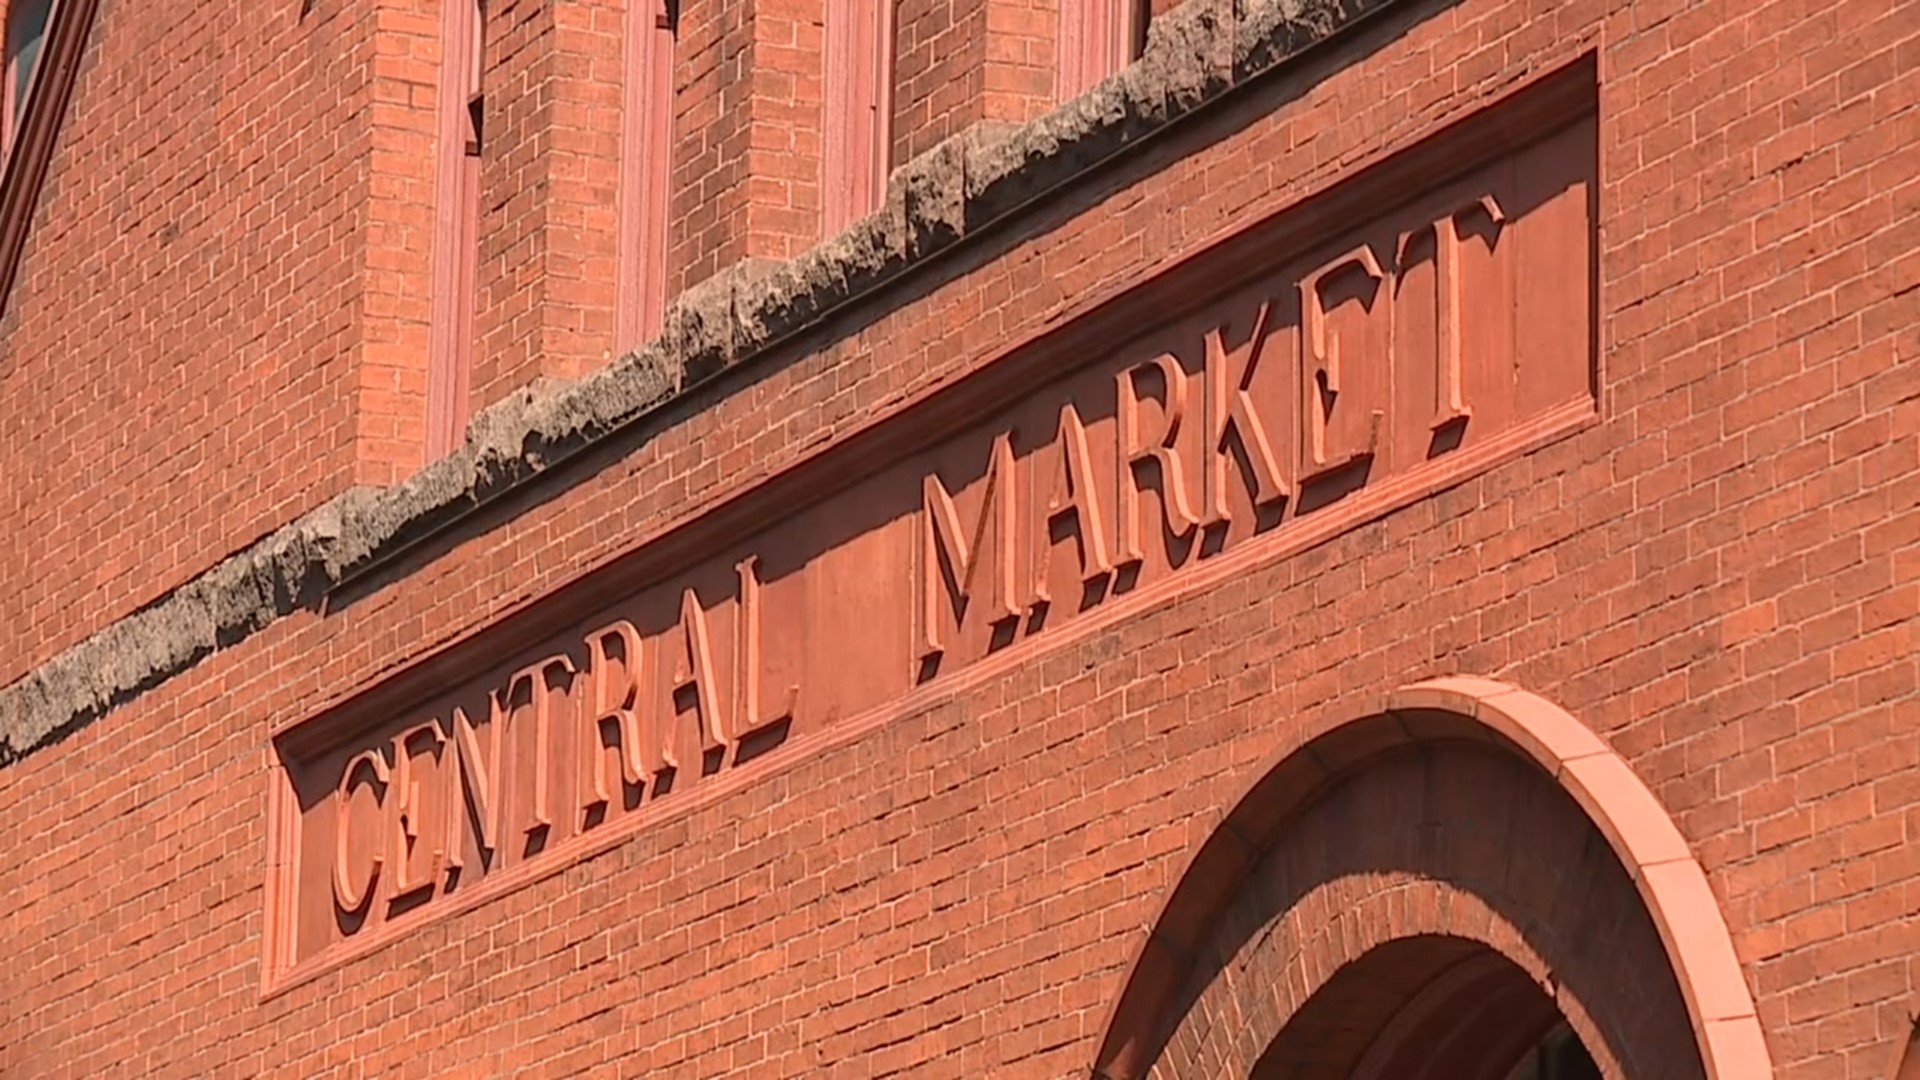 Right in the heart of downtown Lancaster is the Central Market, a beautiful brick building that local vendors have called home since 1889.